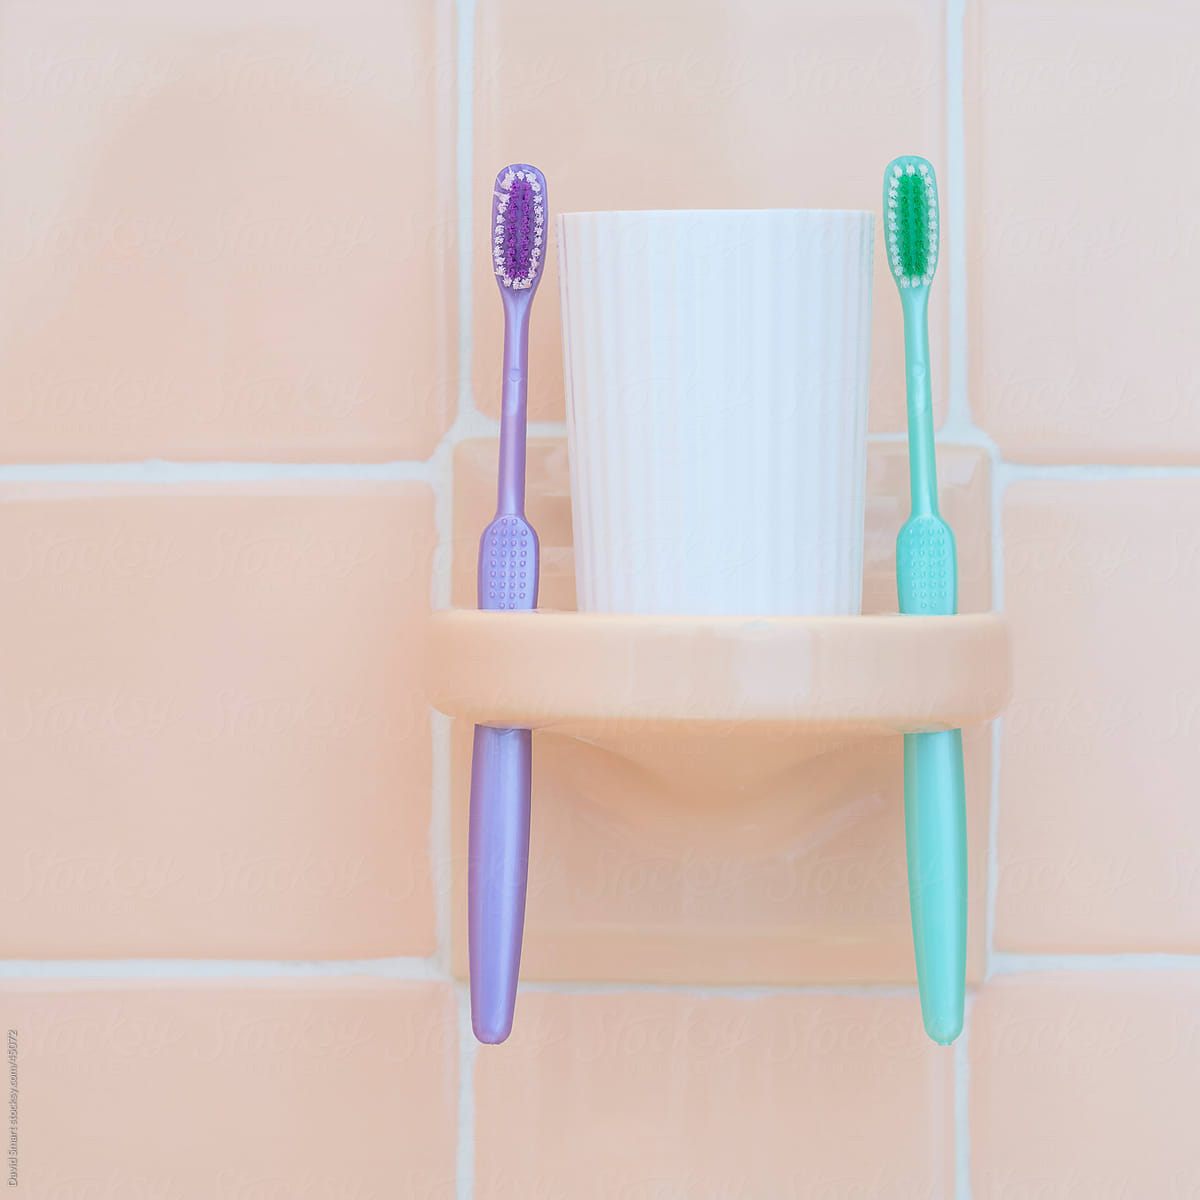 Toothbrushes in porcelain tile holder with a white cup